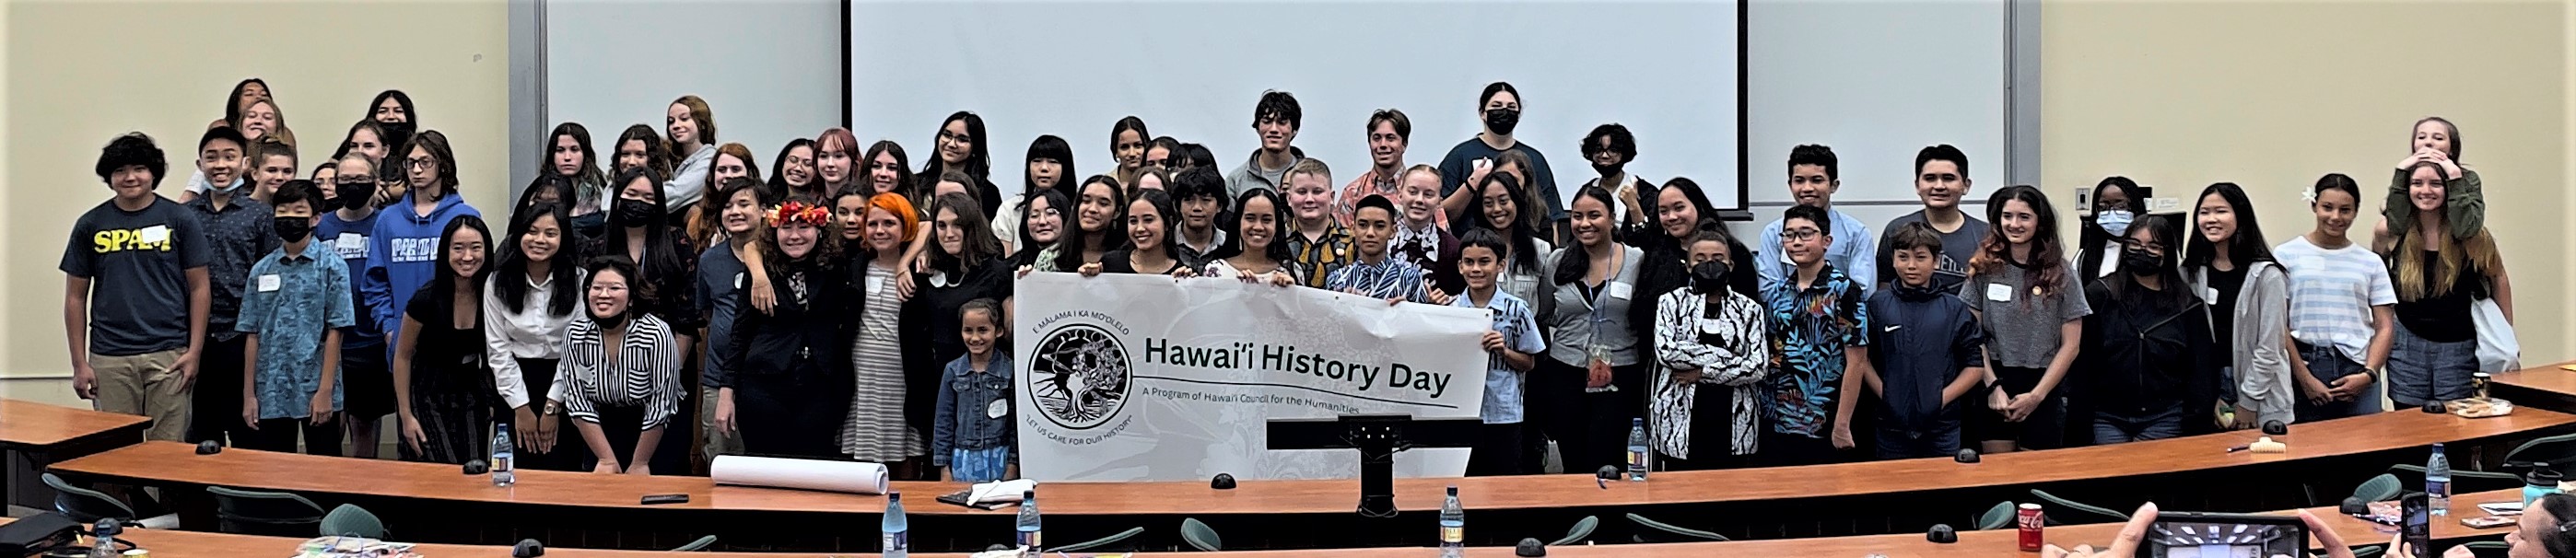 Participants smiling and holding banner that reads "Hawai`i History Day" with event logo